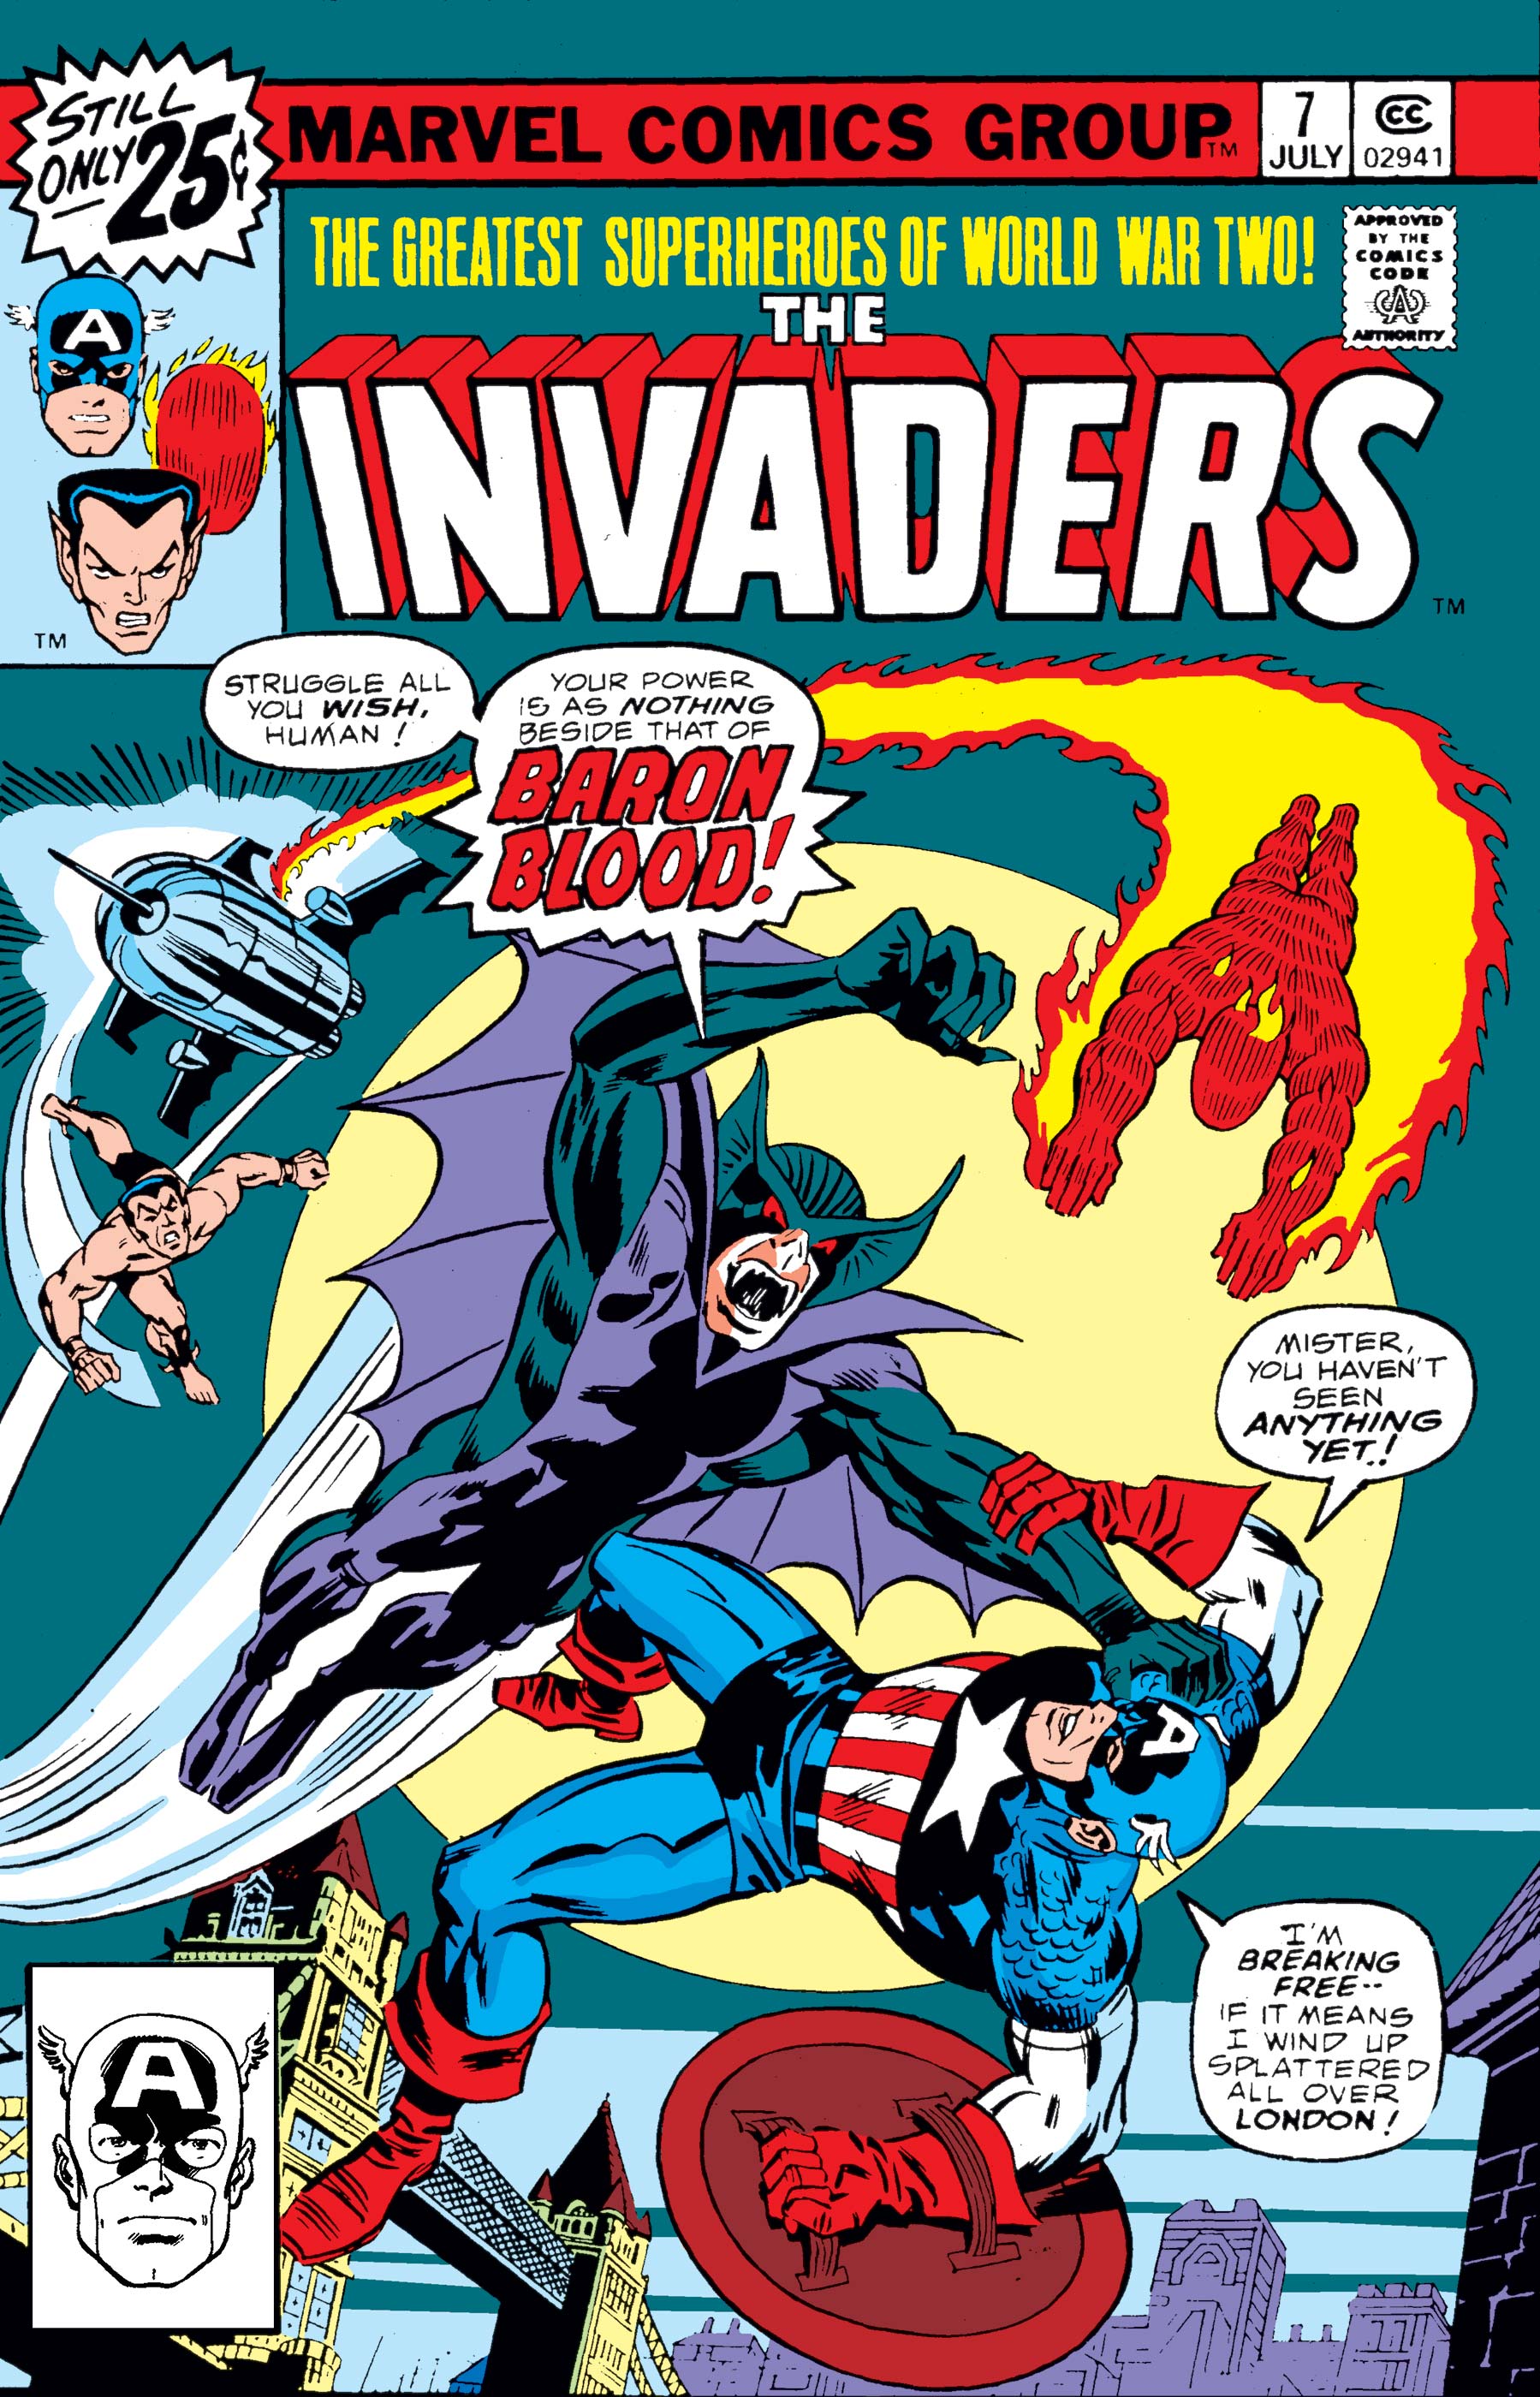 Invaders (1975) #7